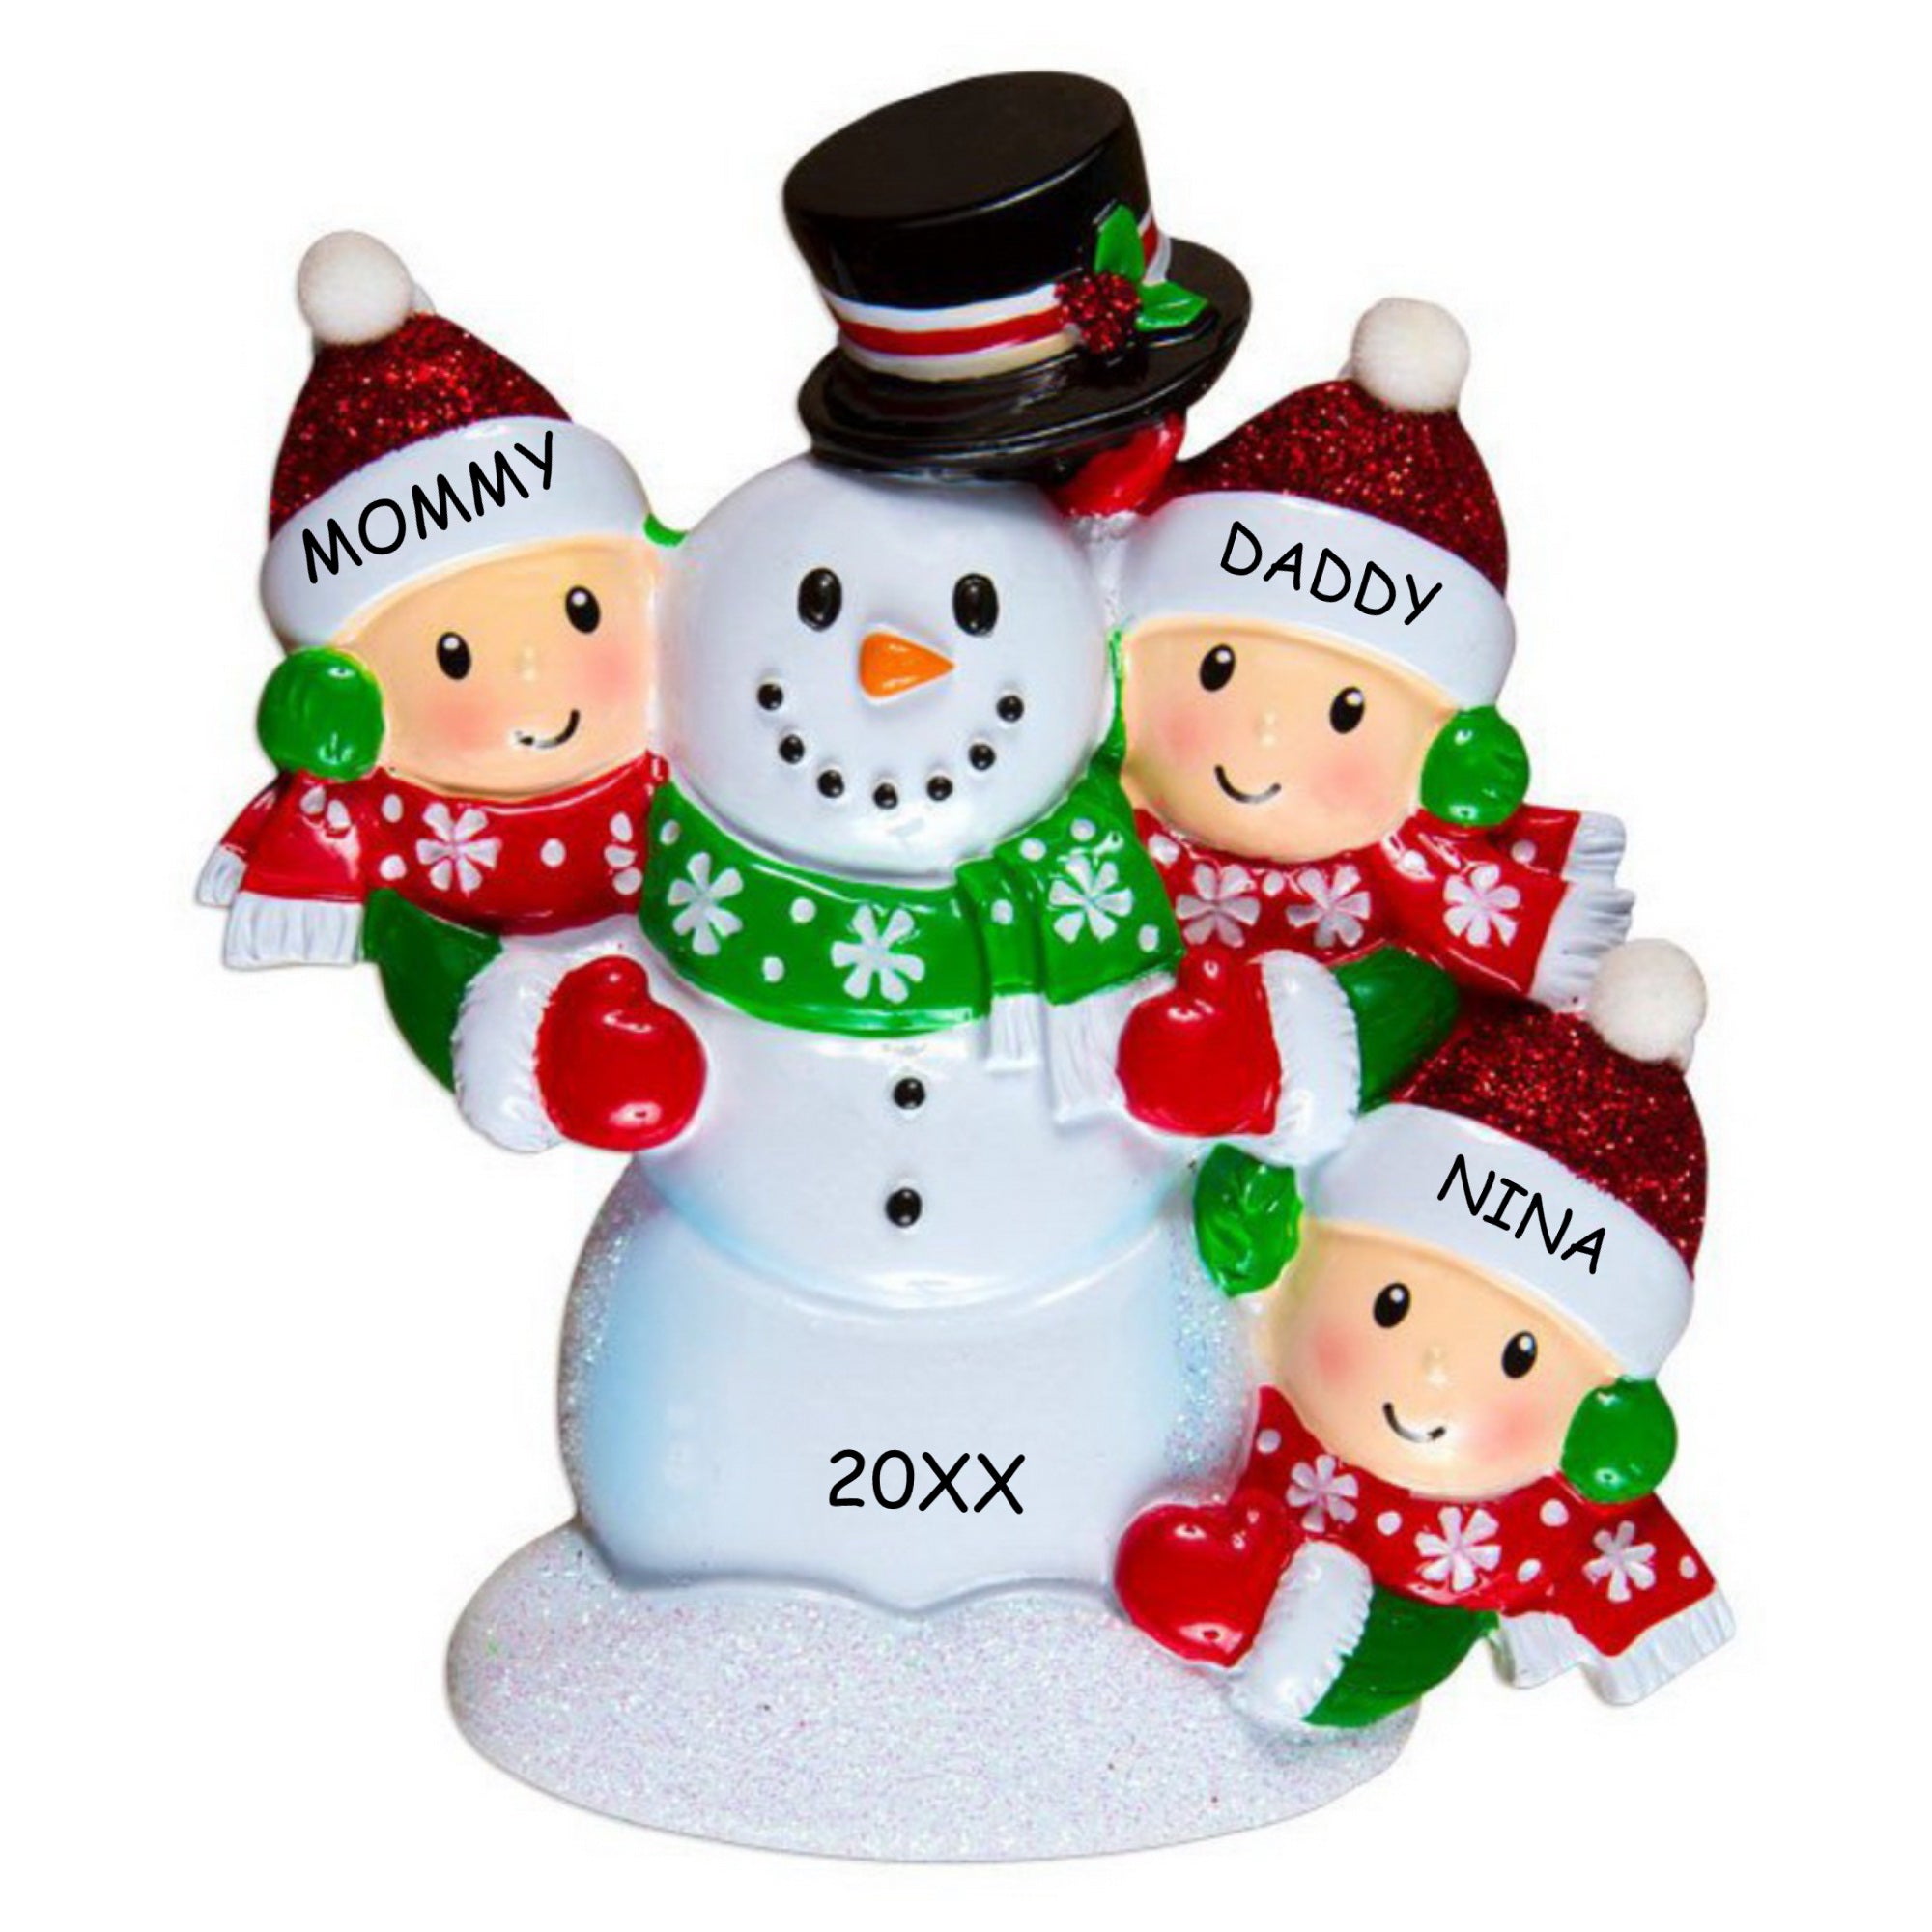 Personalized Snowman Fun Family Christmas Ornament - Family of 3